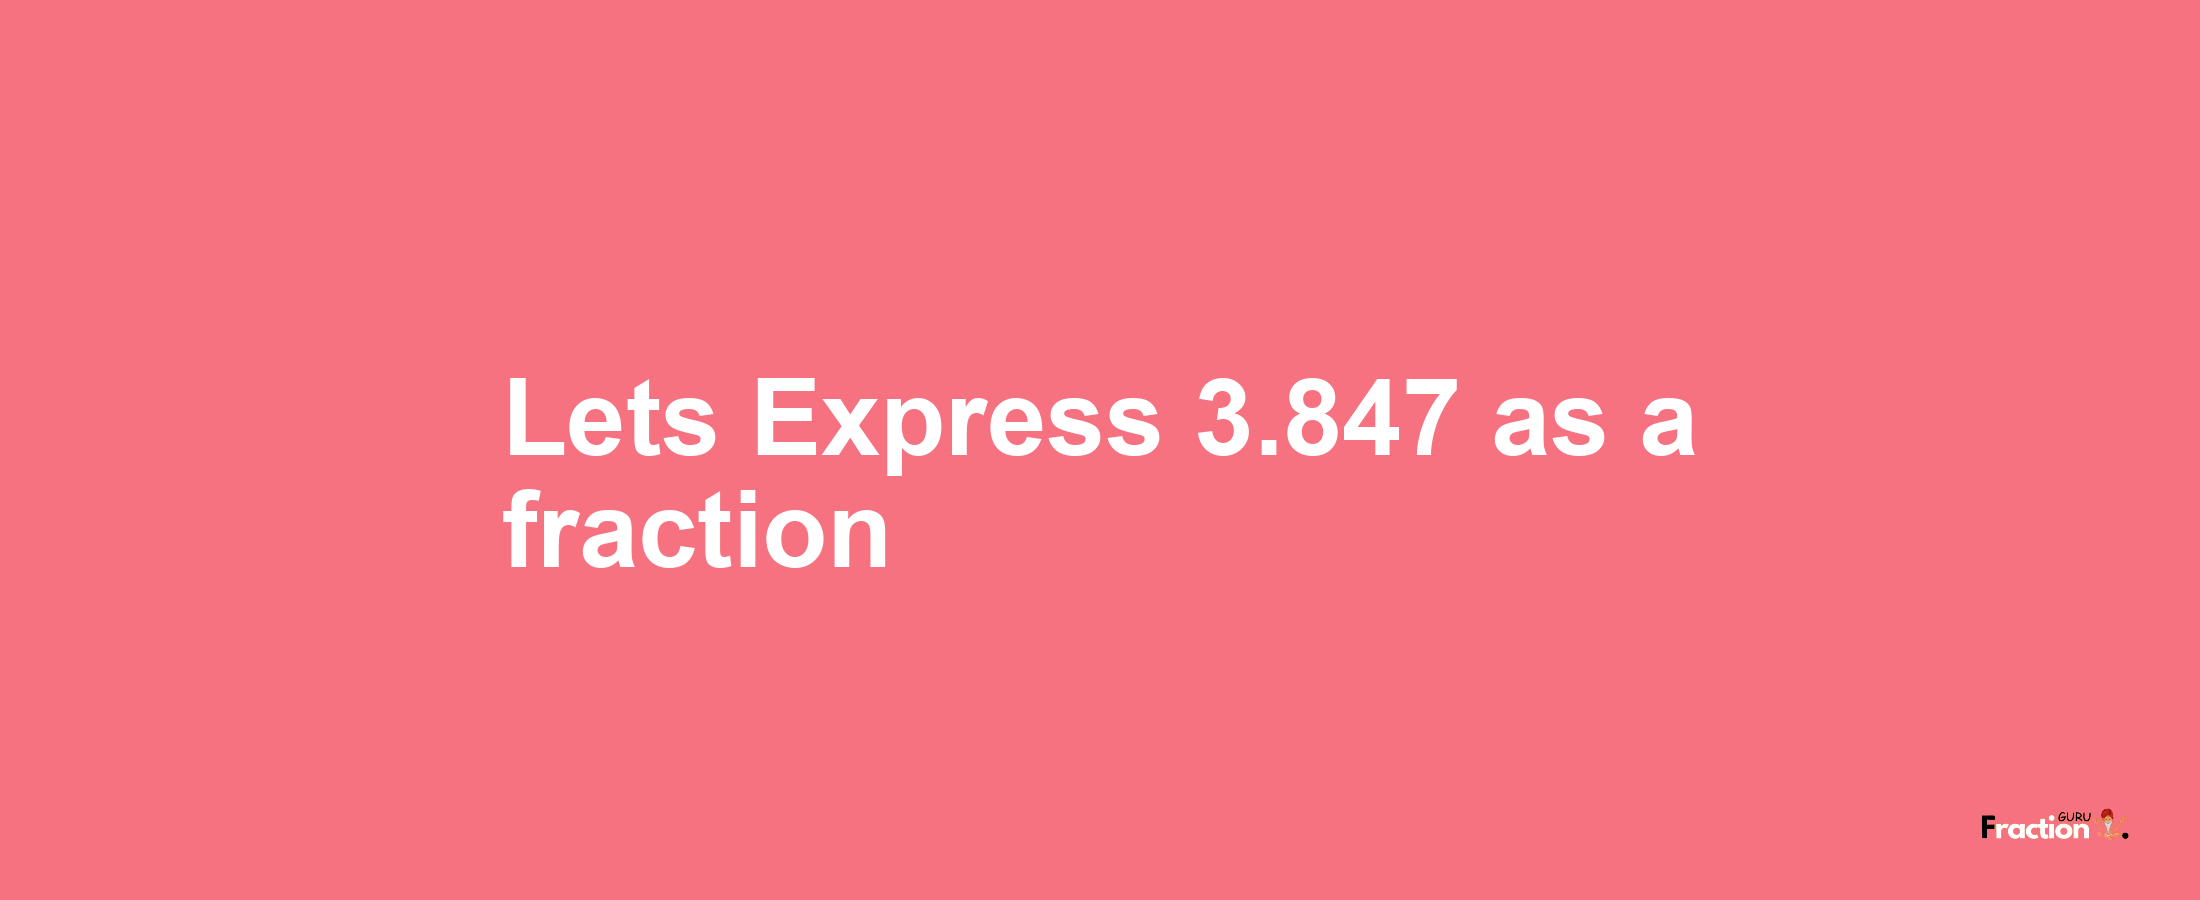 Lets Express 3.847 as afraction